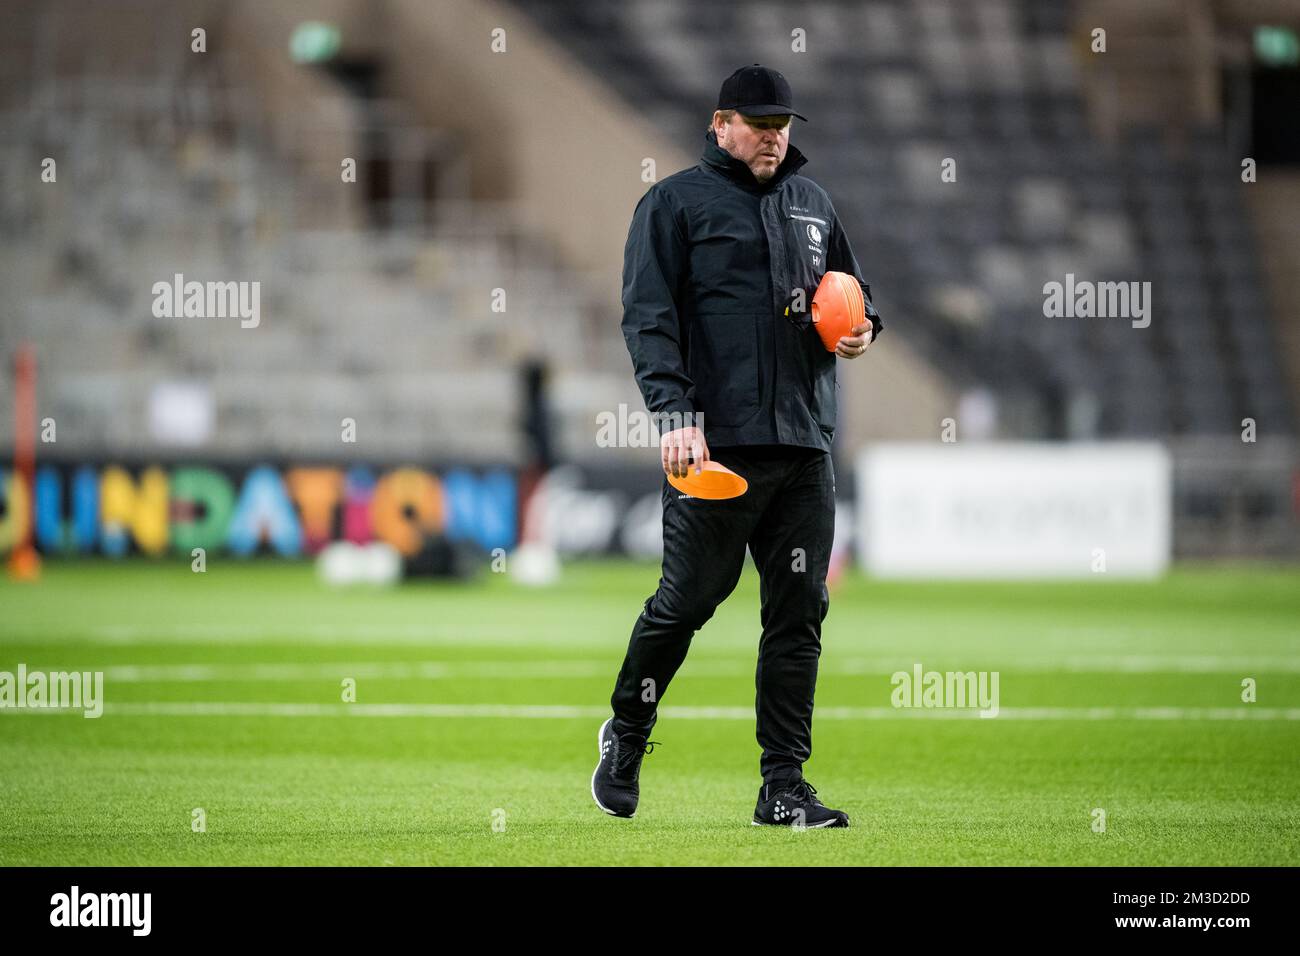 Gent's head coach Hein Vanhaezebrouck pictured in action during a training session of Belgian soccer team KAA Gent, Wednesday 12 October 2022 in Johanneshov, Stockholm, Sweden, in preparation of tomorrow's game against Swedish team Djurgardens IF on day four of the Uefa Europa Conference League group stage. BELGA PHOTO JASPER JACOBS Stock Photo